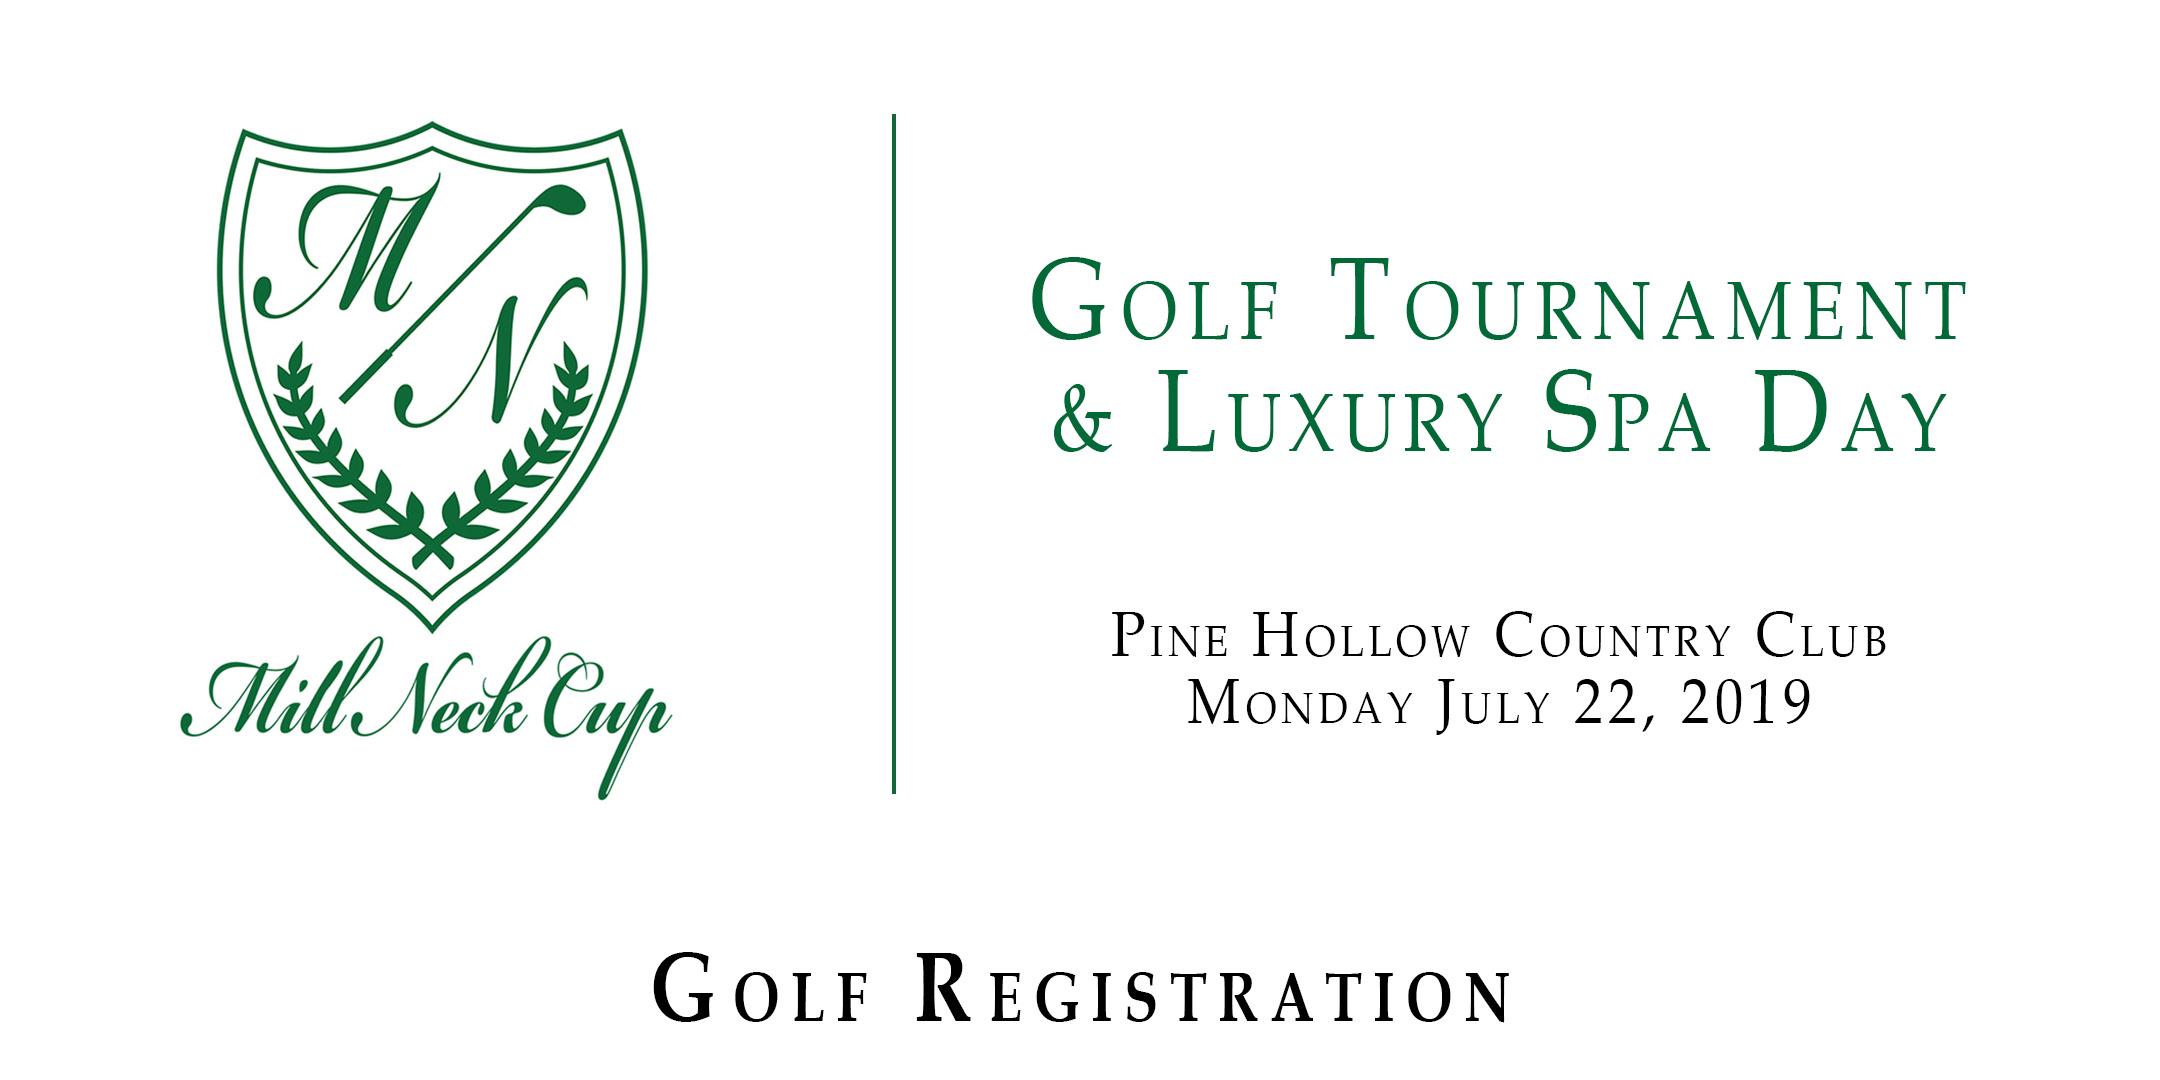 Mill Neck Cup - Golf Tournament & Luxury Spa Day